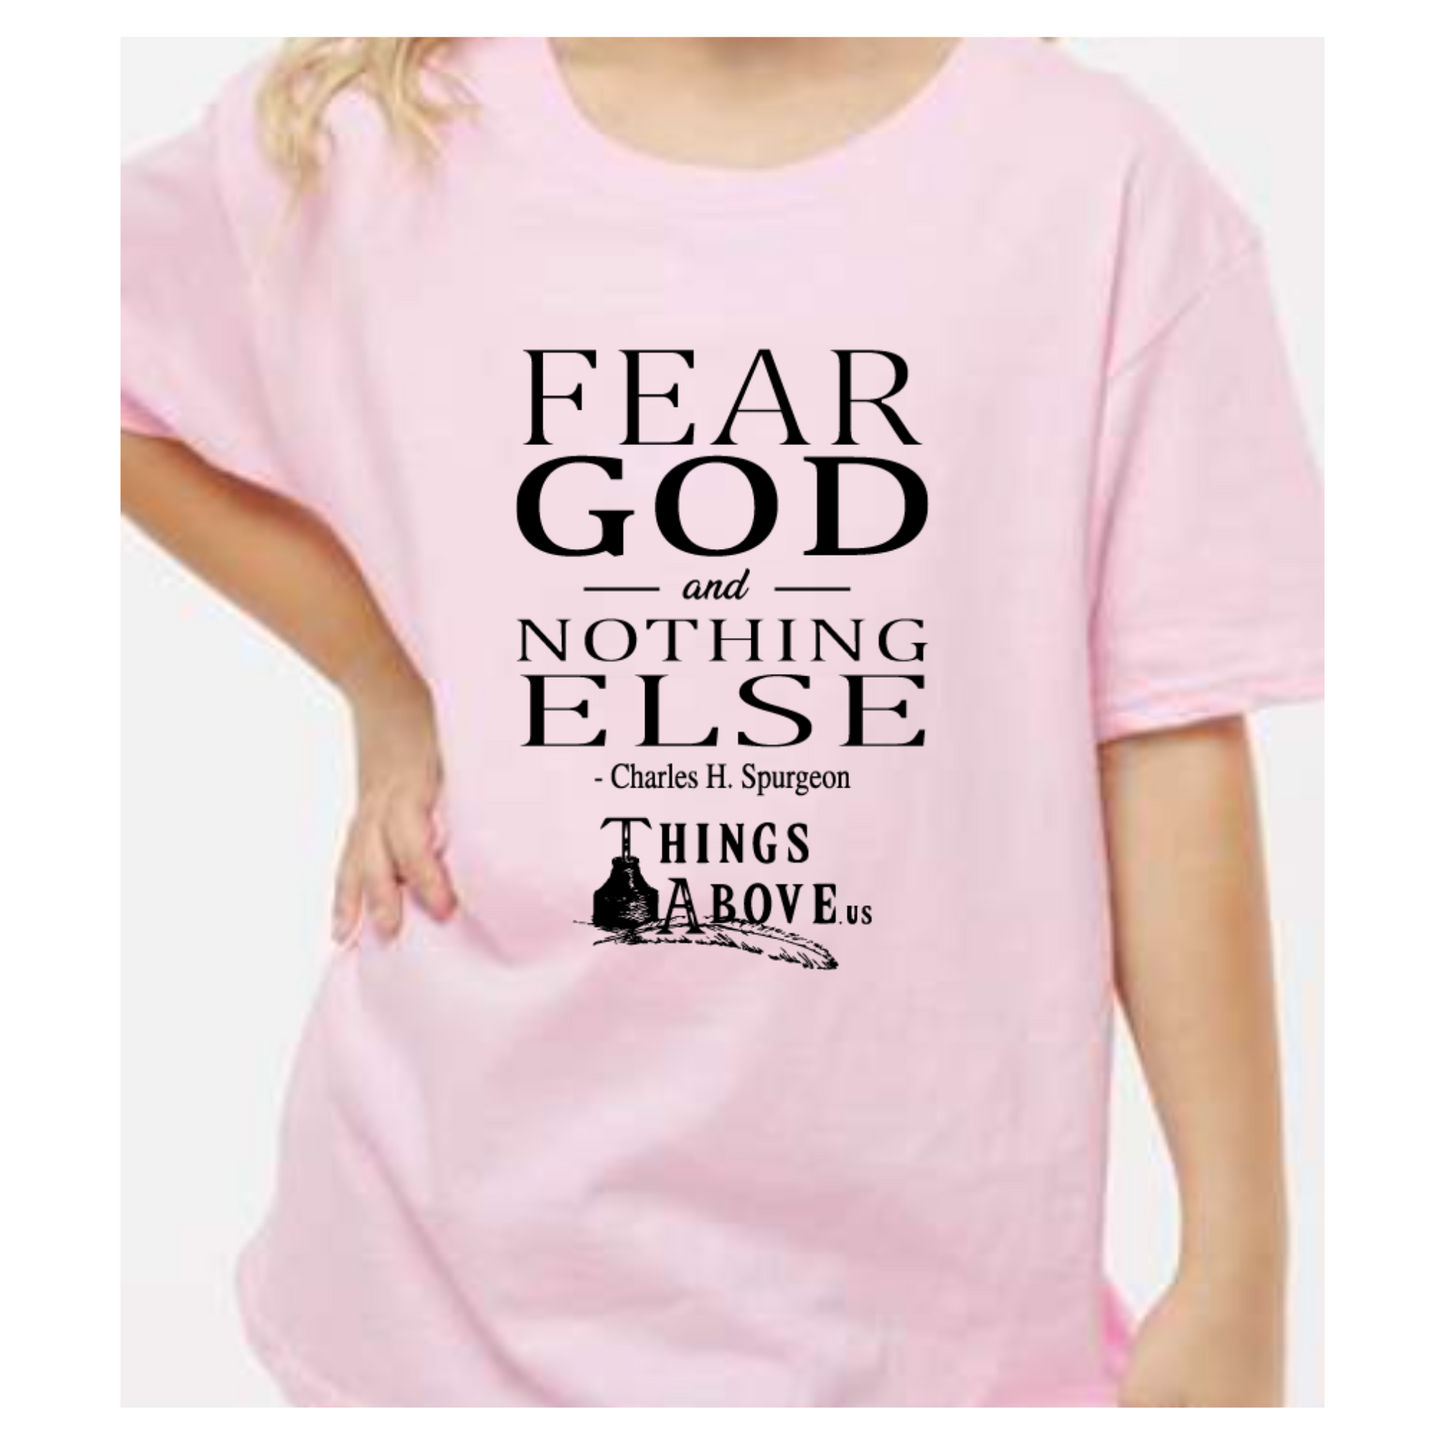 Youth Size - Fear God and Nothing Else Shirt - Things Above Us